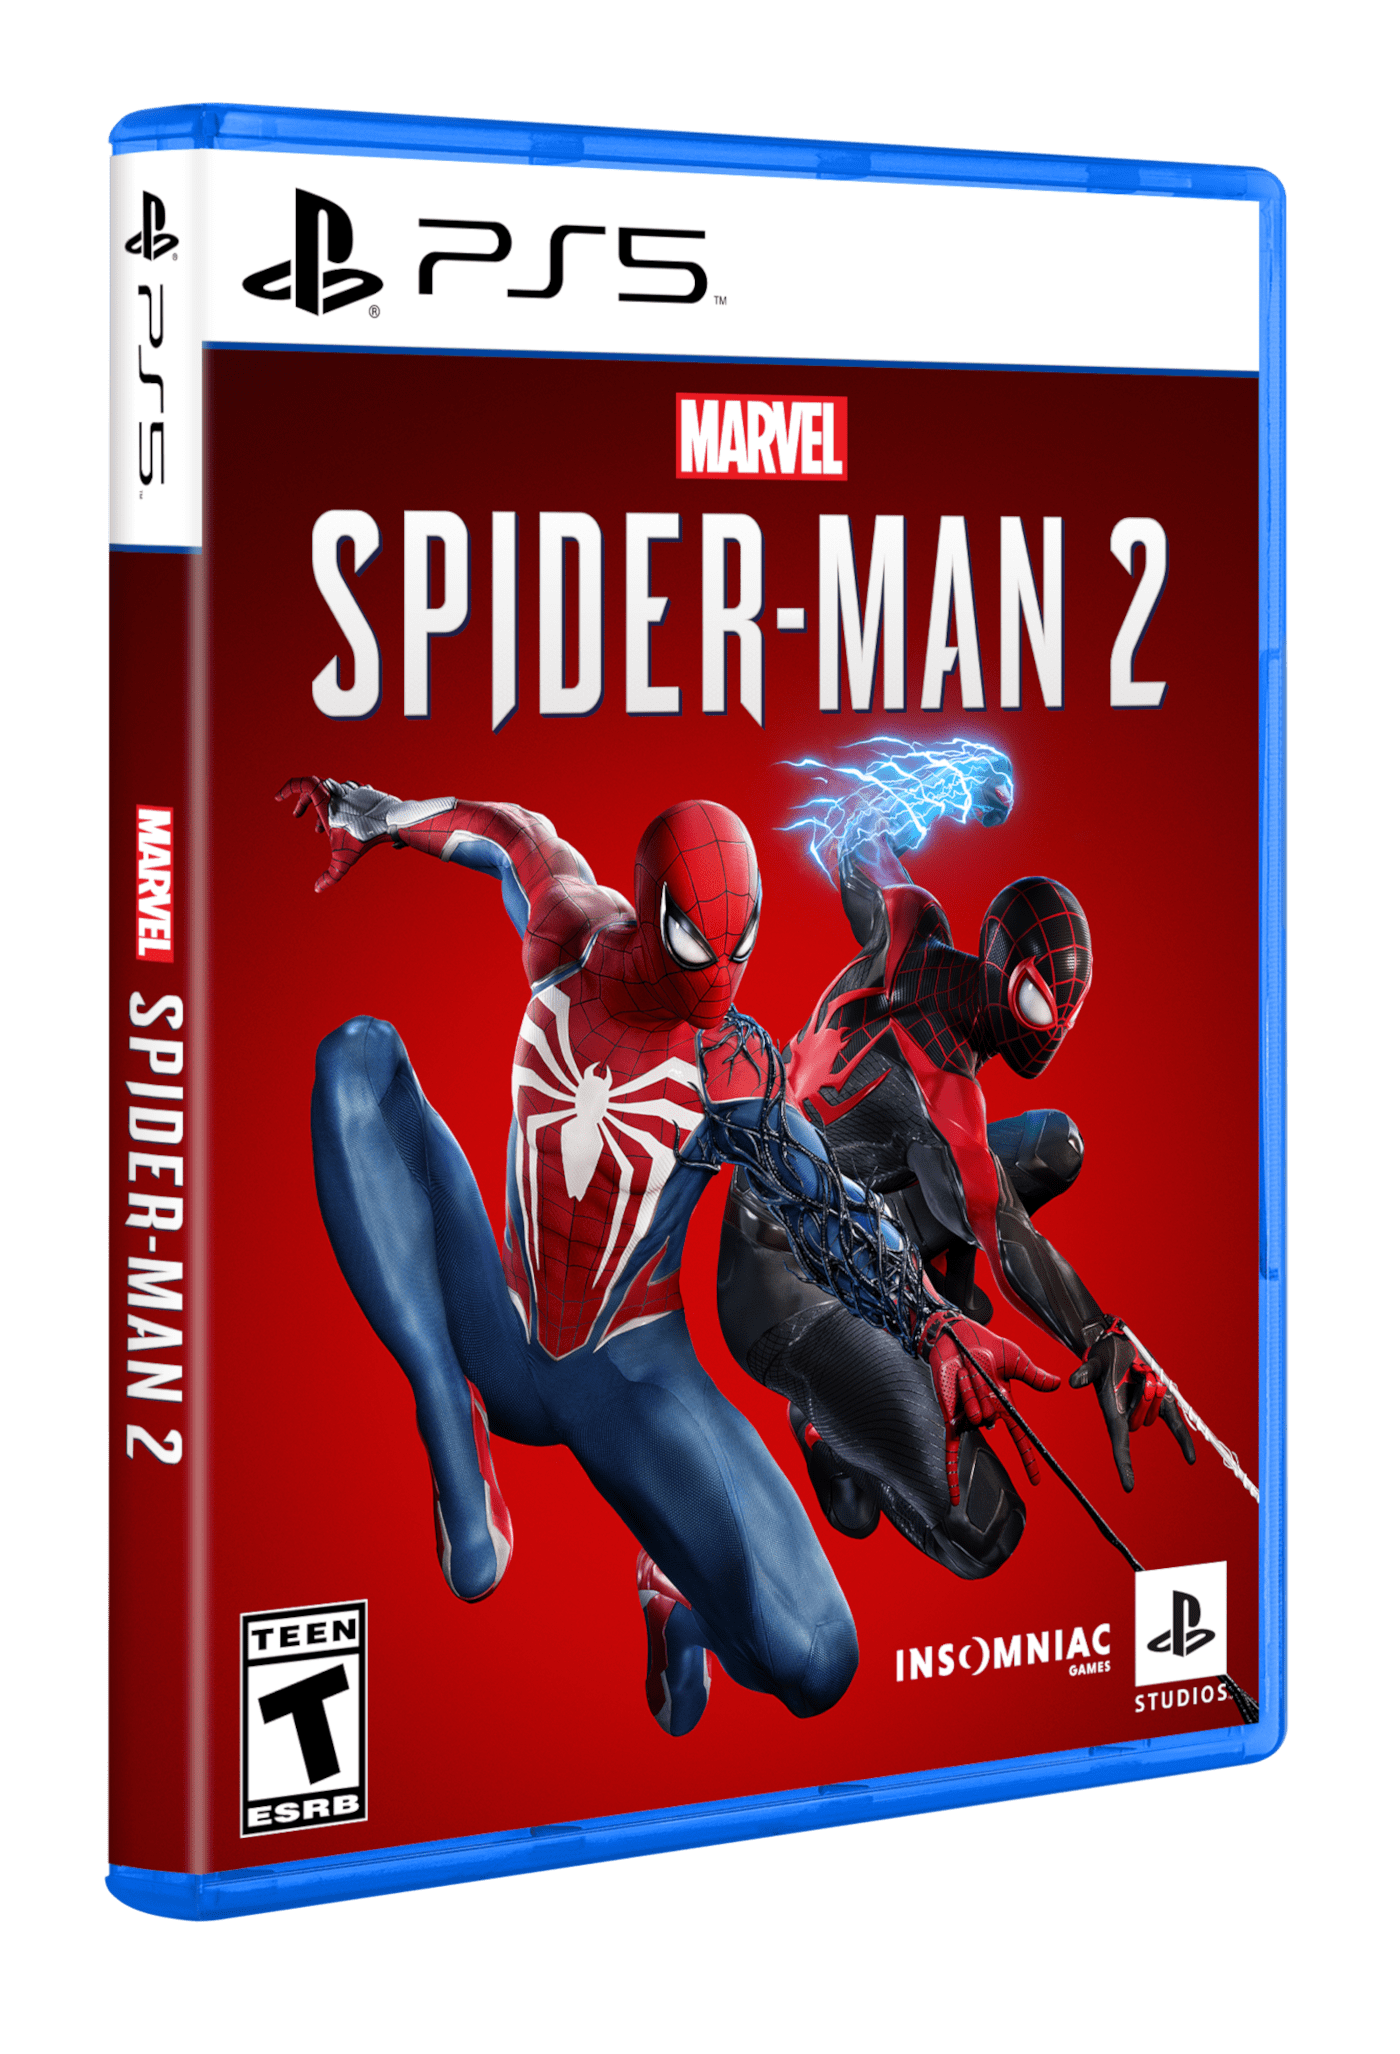 Spider-Man: Across the Spider-Verse 2-Movie Collector's Edition